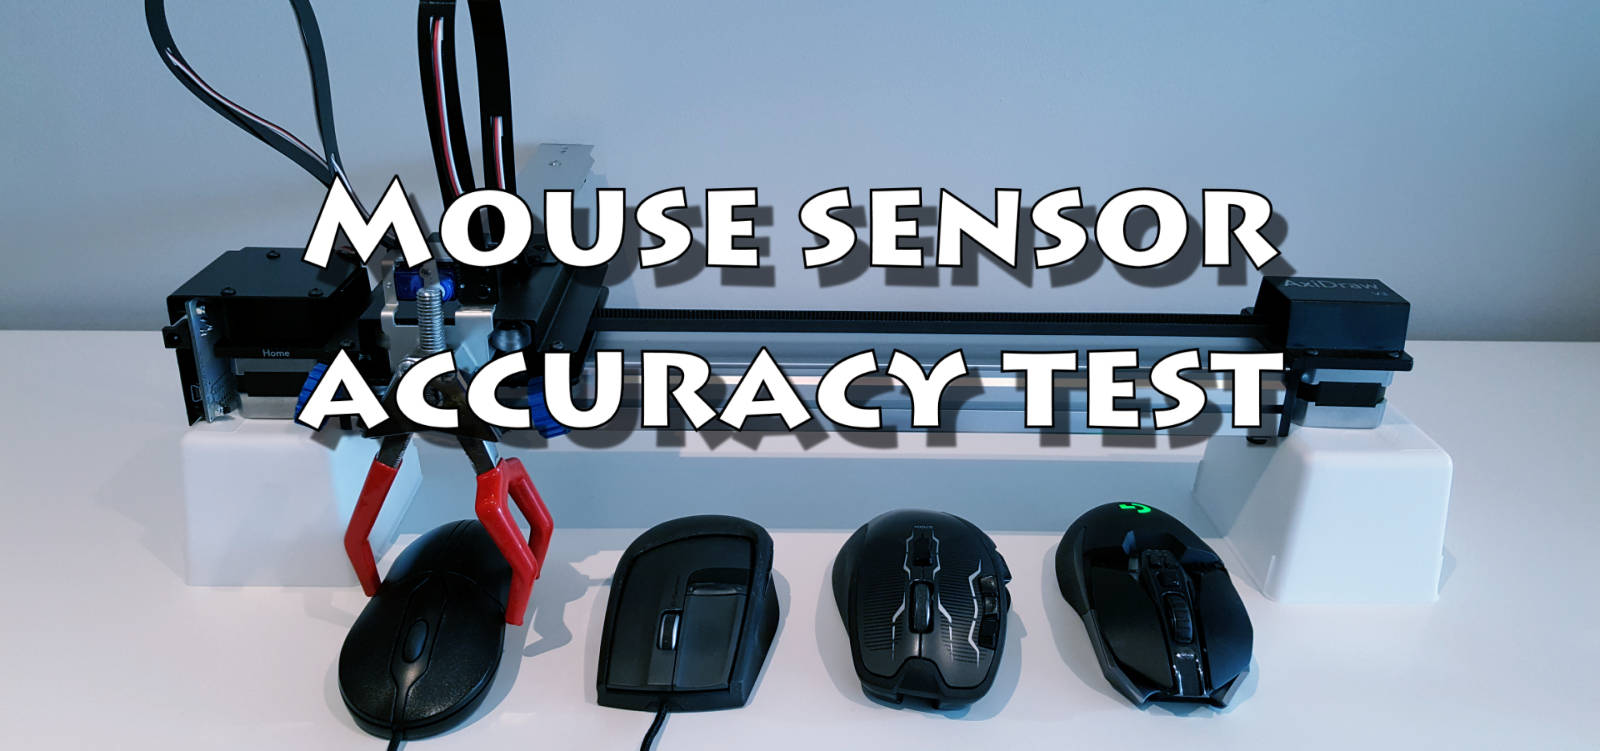 Bestrating Staan voor uitstulping Mouse sensor accuracy test - Updates - Mouse Sensitivity Community